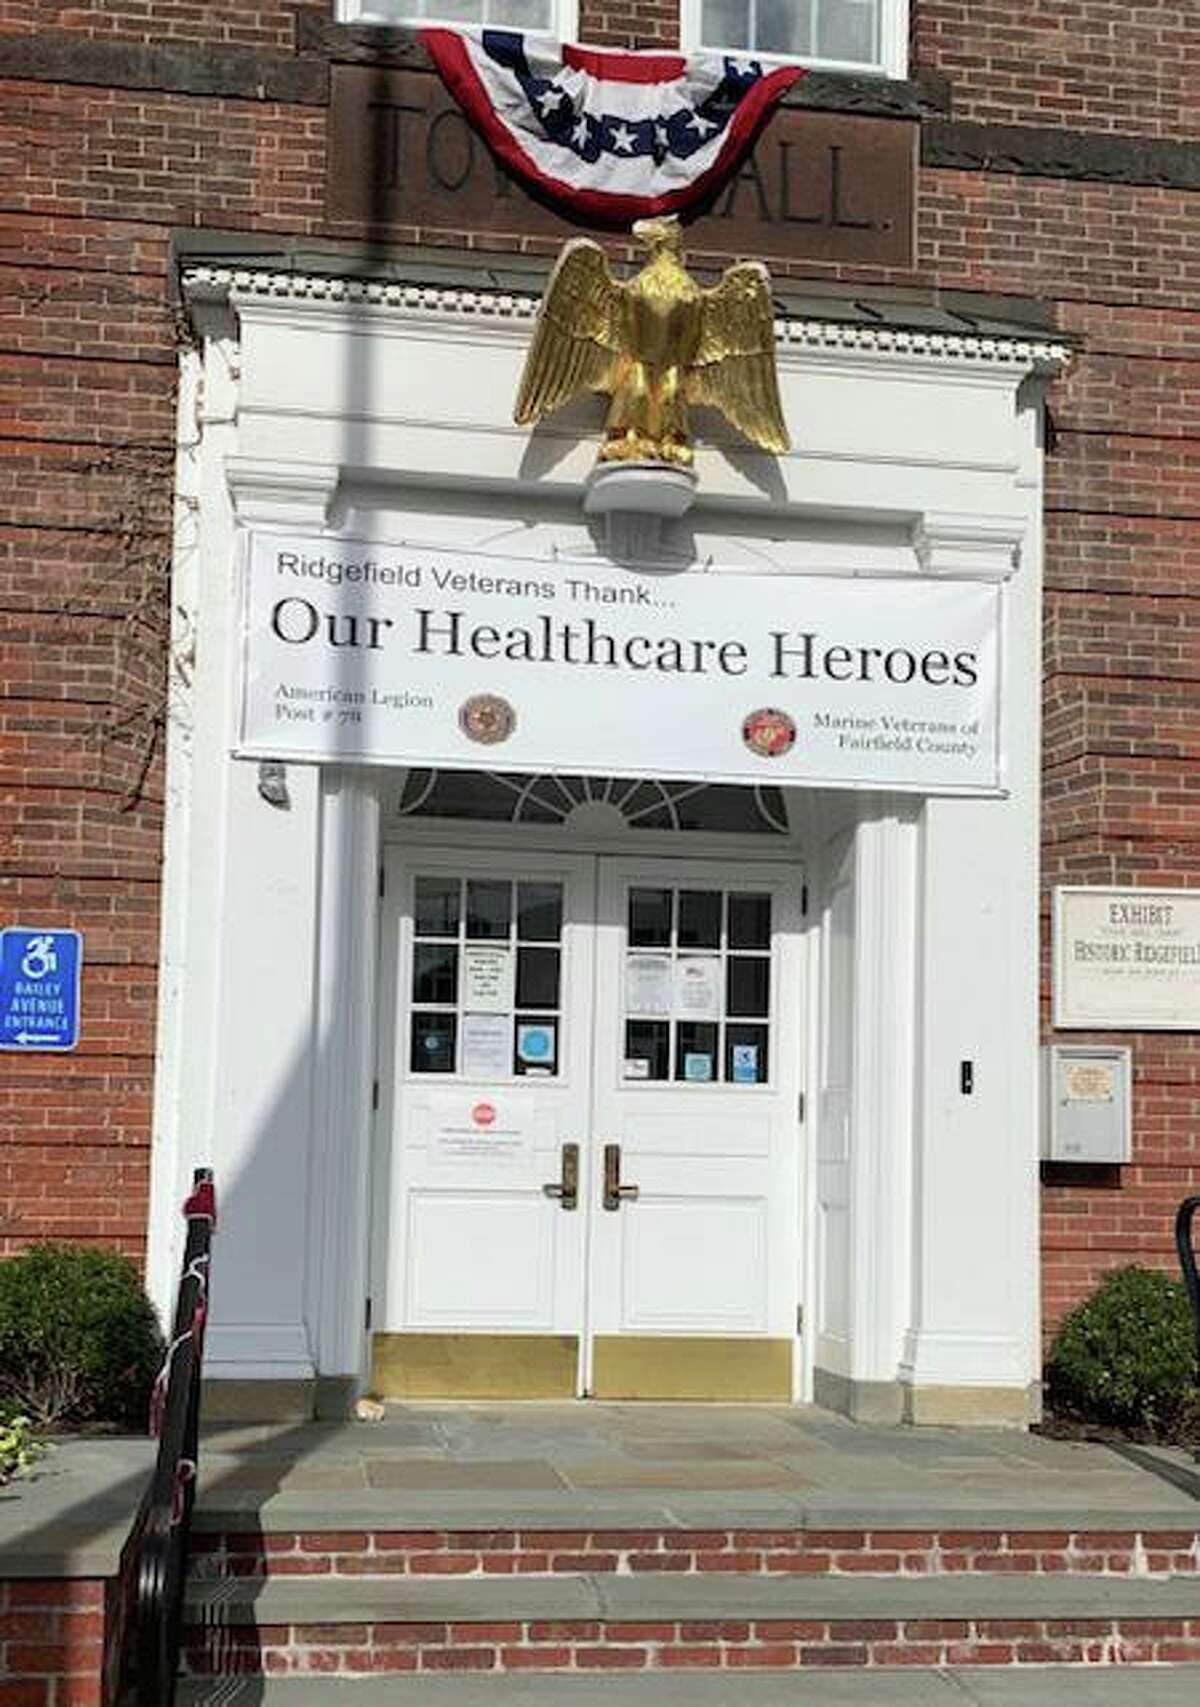 The Marine Veterans of Fairfield County partnered with the Ridgefield American Legion to place a banner over Town Hall thanking our Healthcare Heroes.